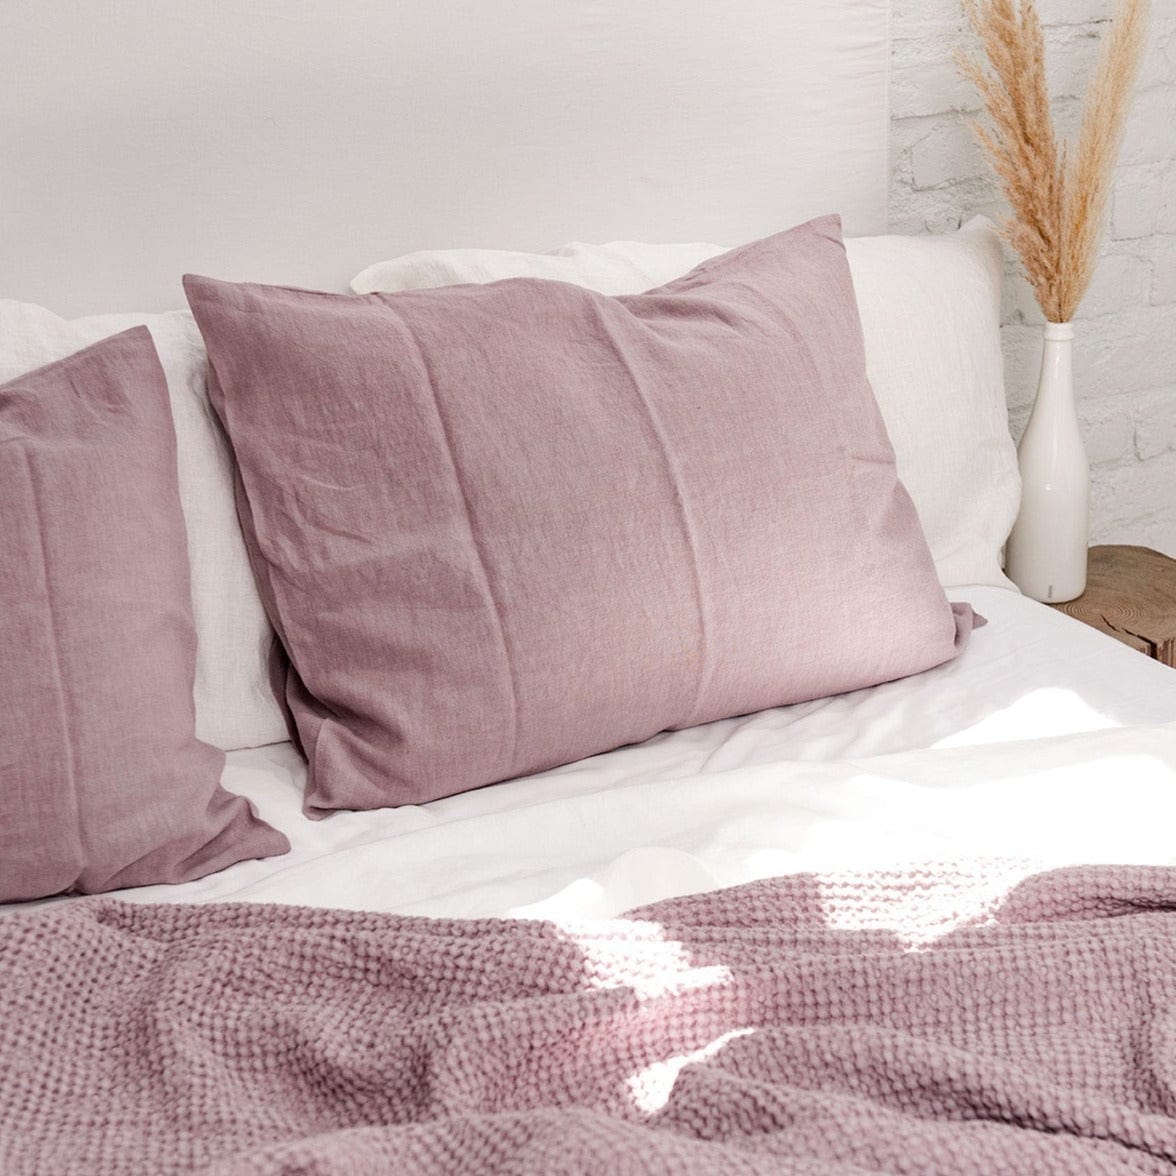 Dusty Rose Pink 100% Linen Pillowcase - Linen and Letters